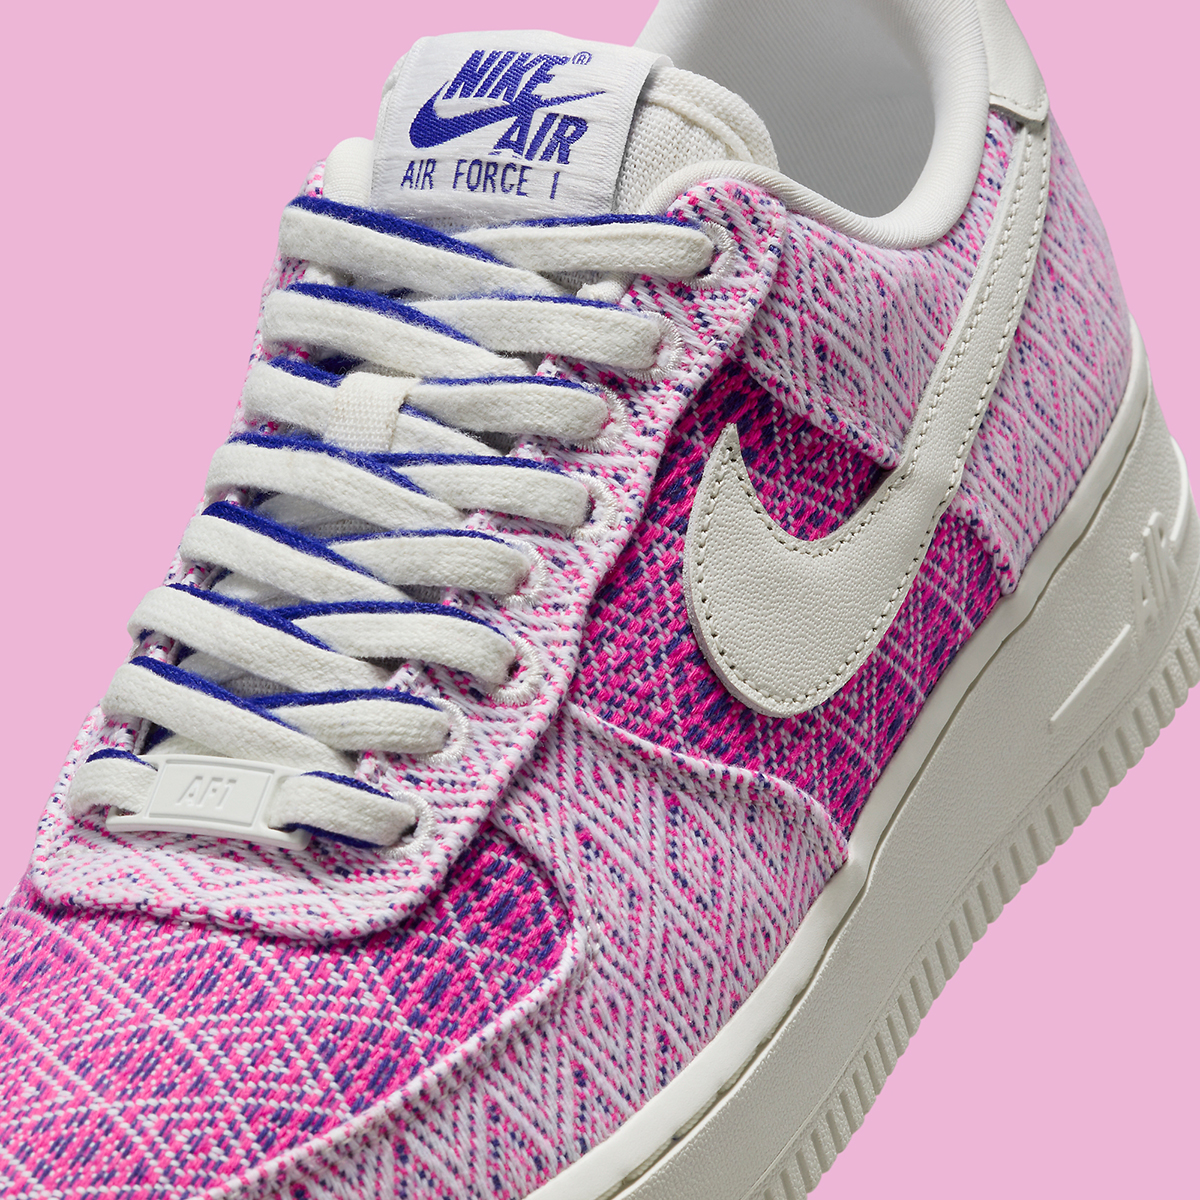 Nike cheap nike prod free shipping paypal account Low Pink Tapestry Hf5128 902 6